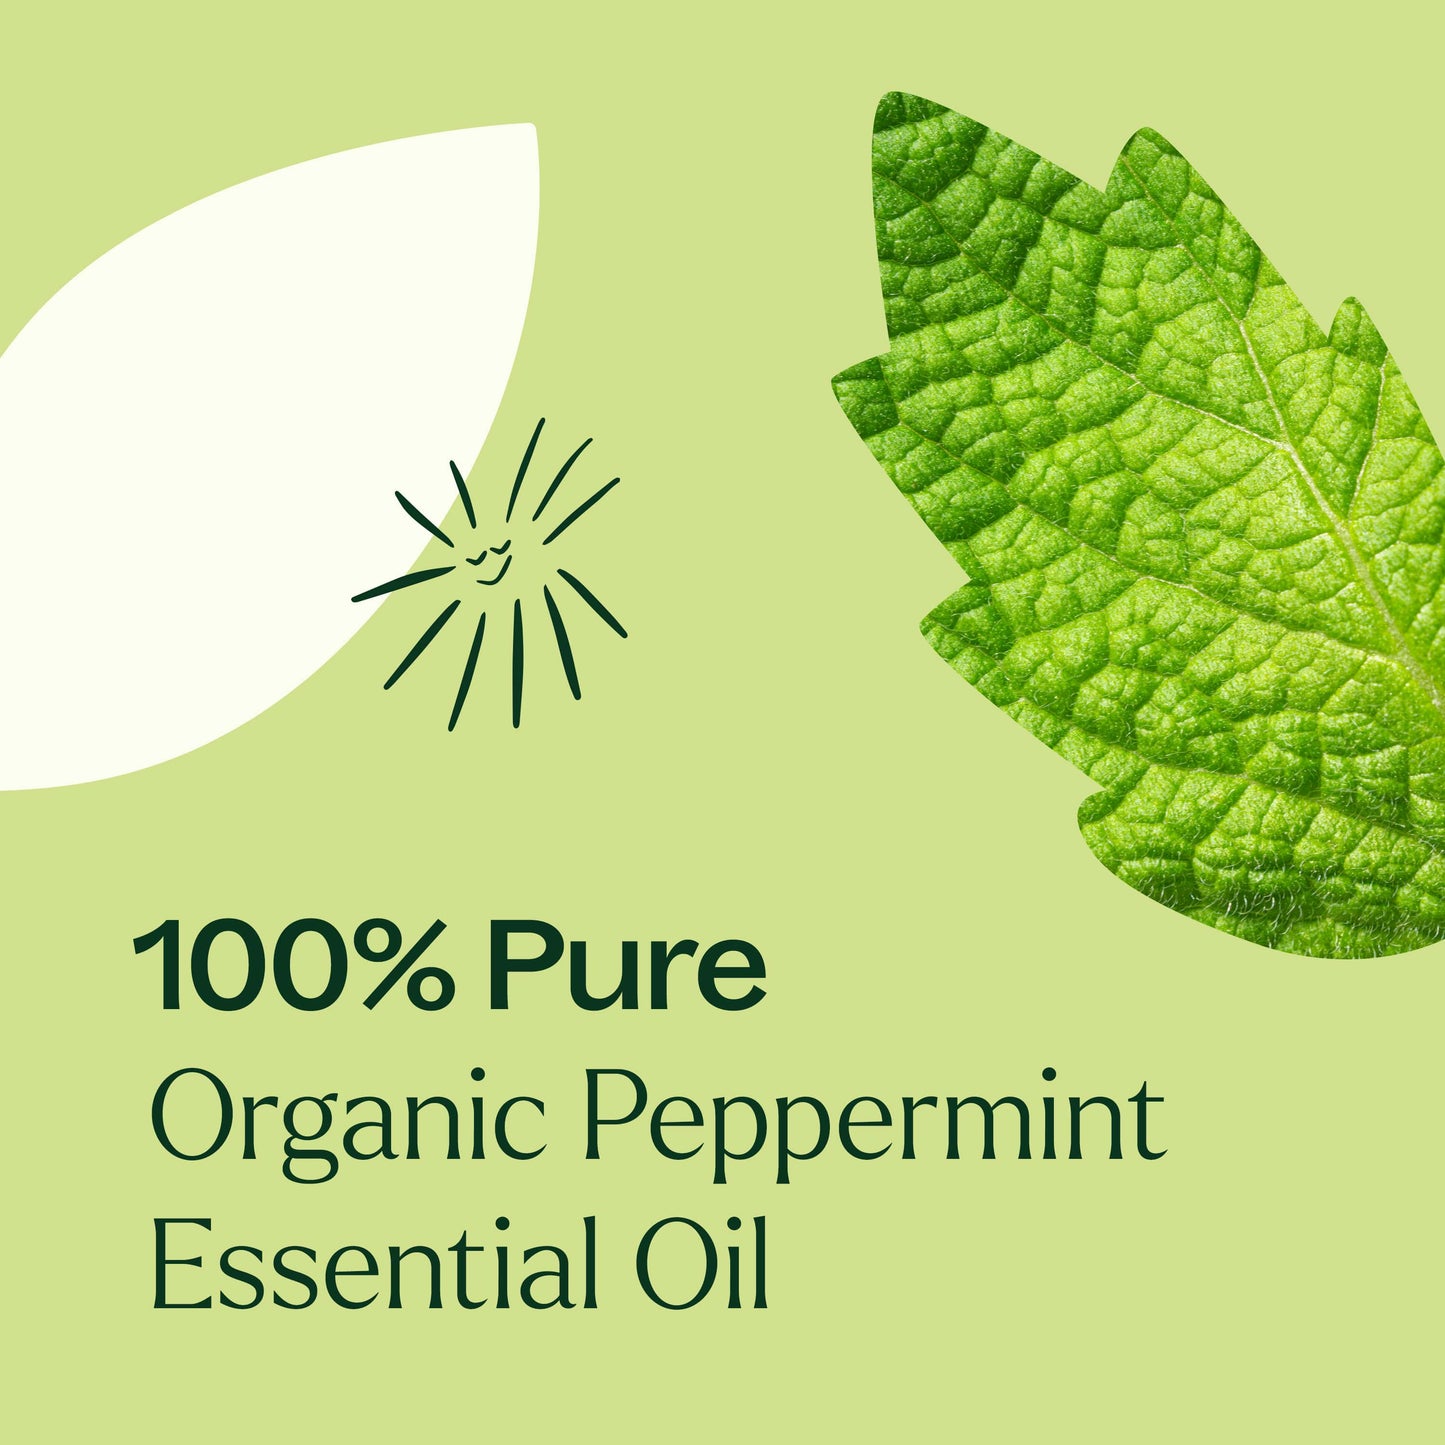 Organic Peppermint Essential Oil is 100% pure